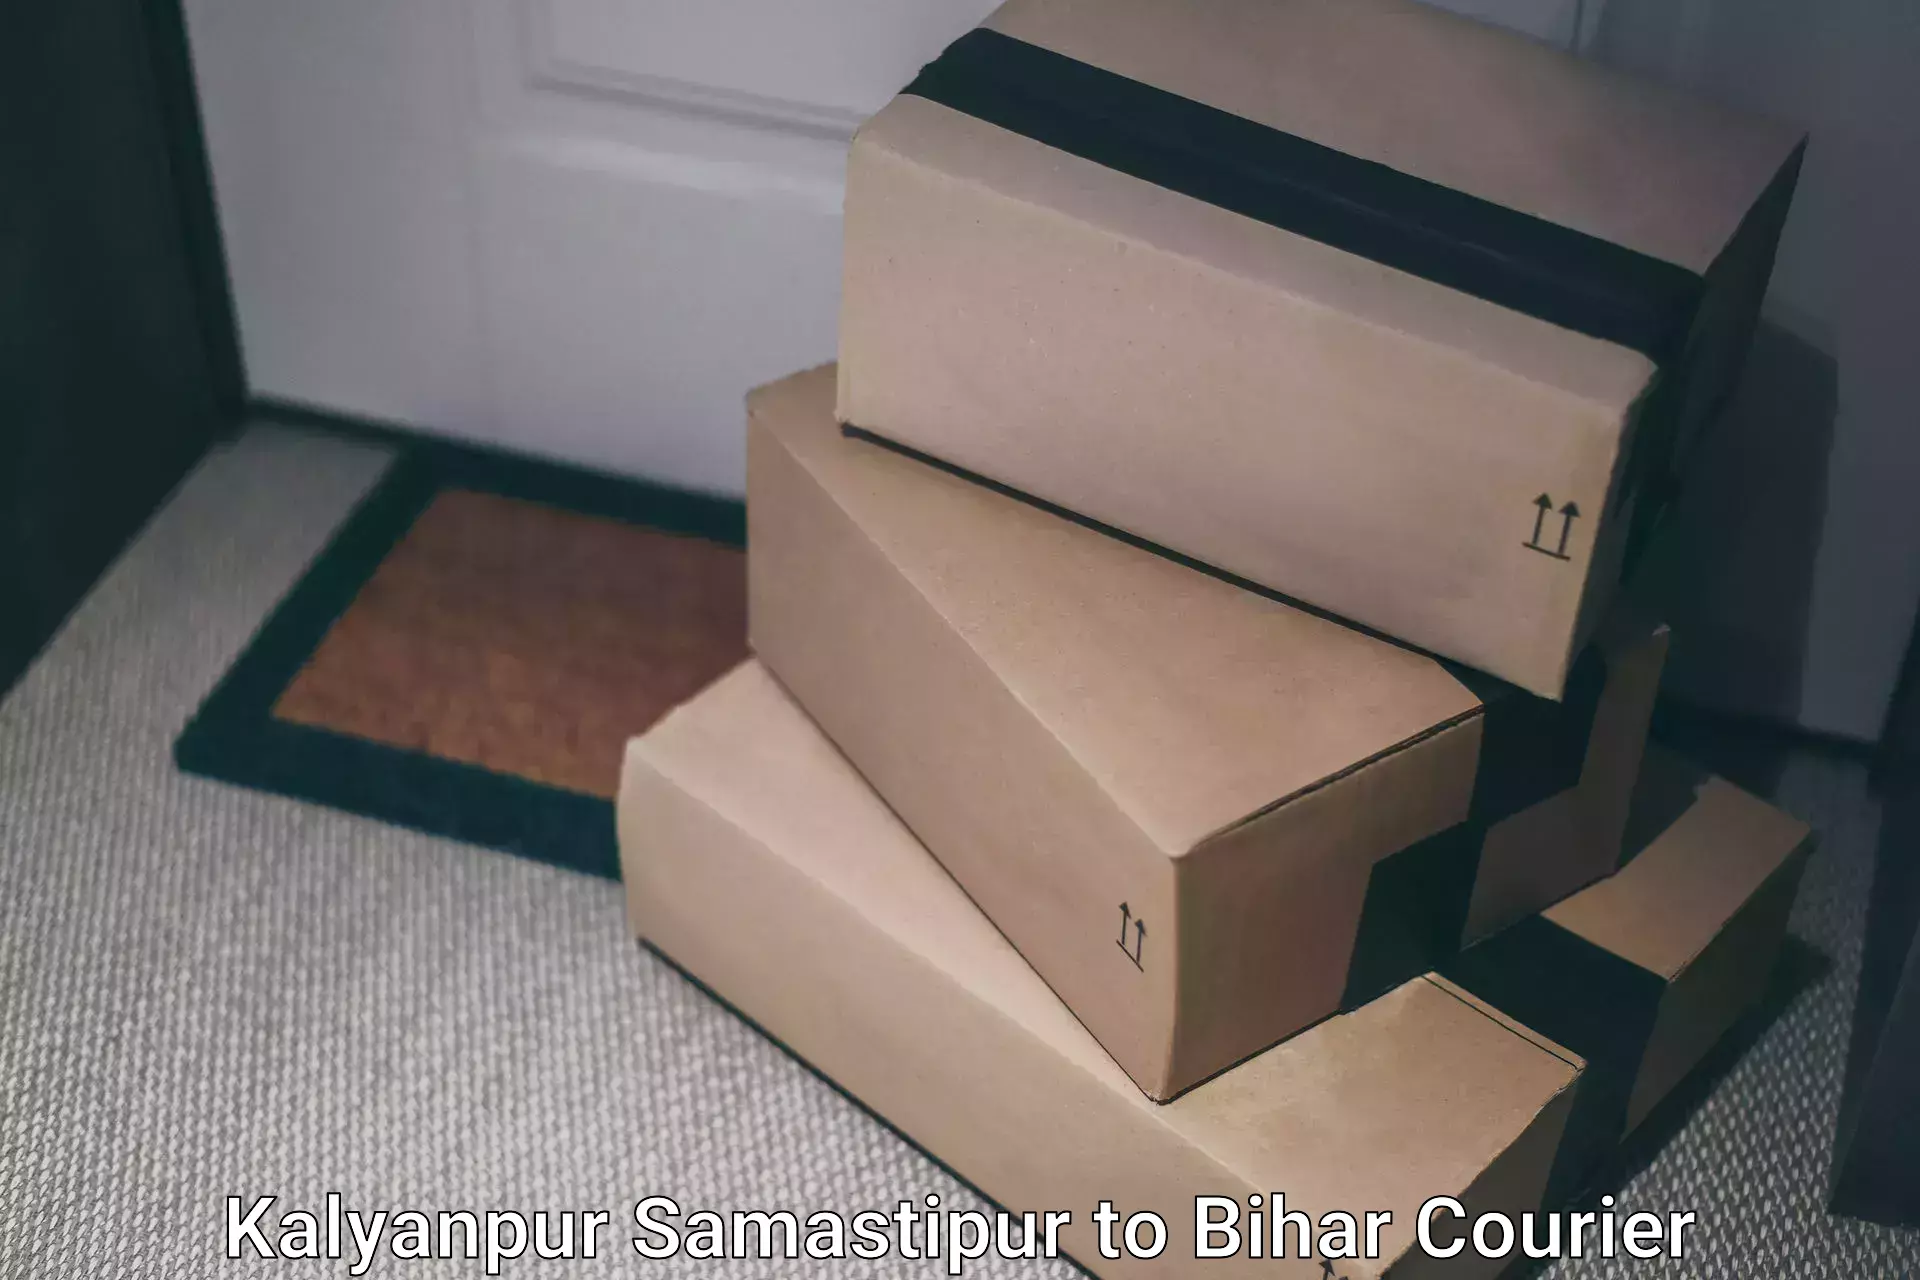 Reliable courier services in Kalyanpur Samastipur to Bihar